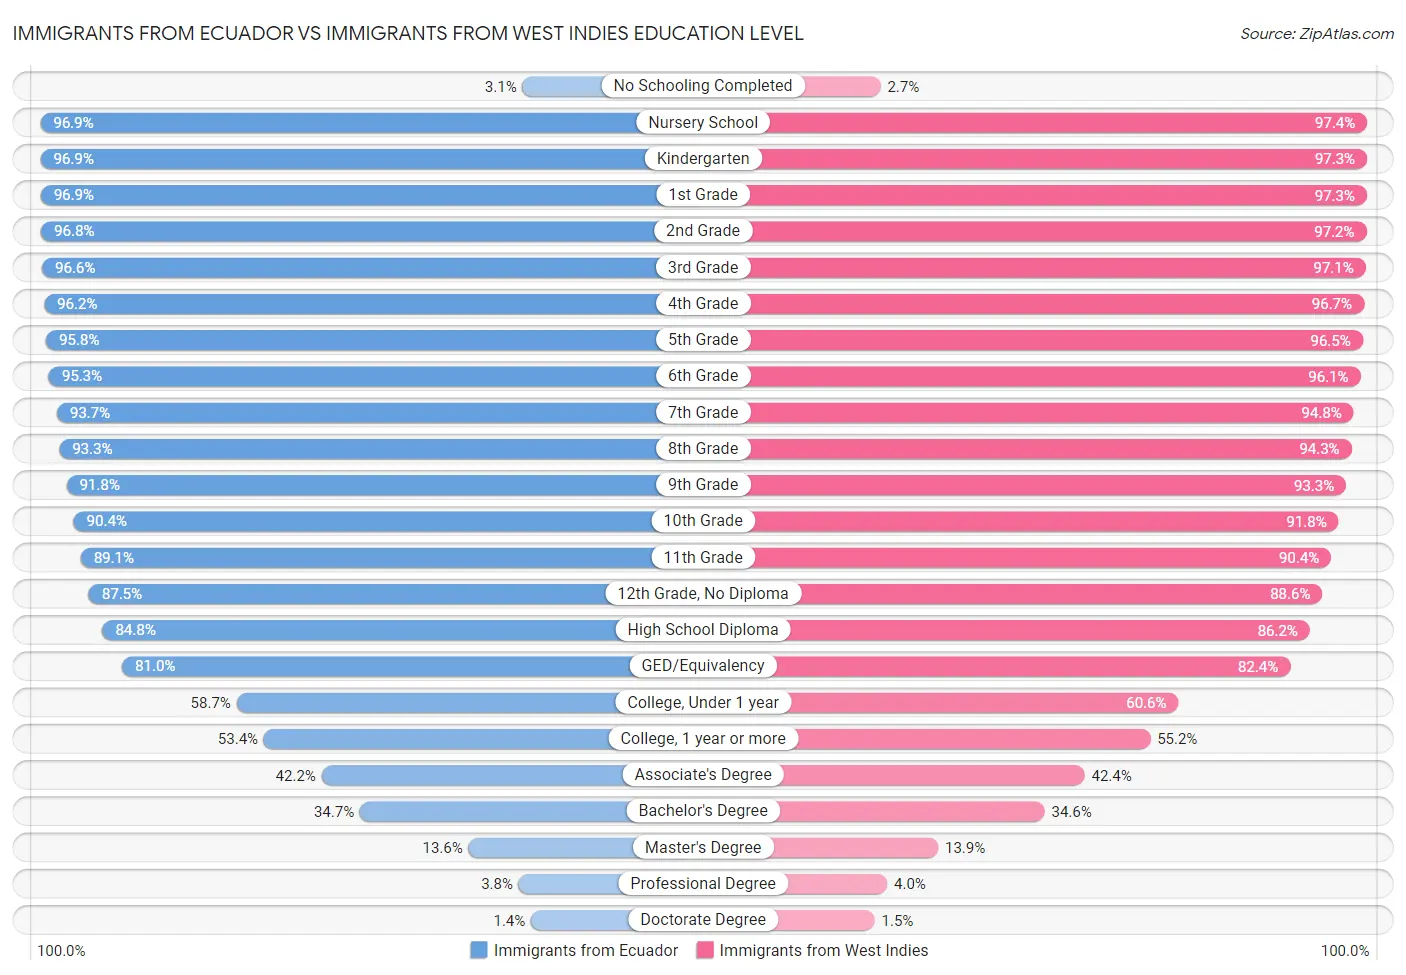 Immigrants from Ecuador vs Immigrants from West Indies Education Level